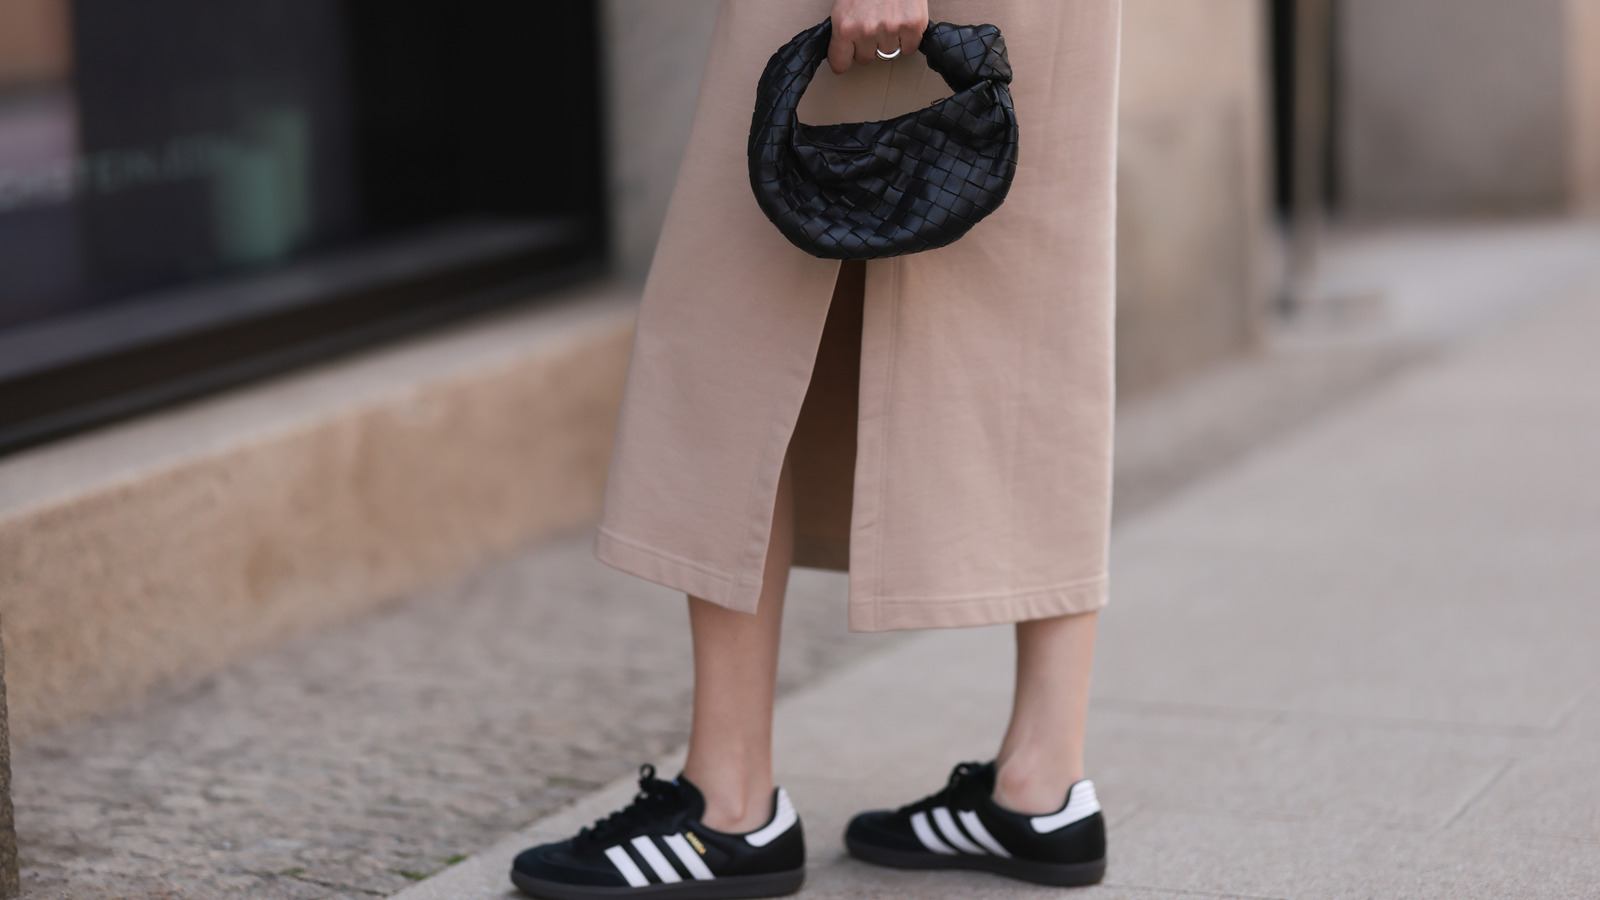 Adidas Sambas Are The Shoe Trend That Looks Great With Any Aesthetic